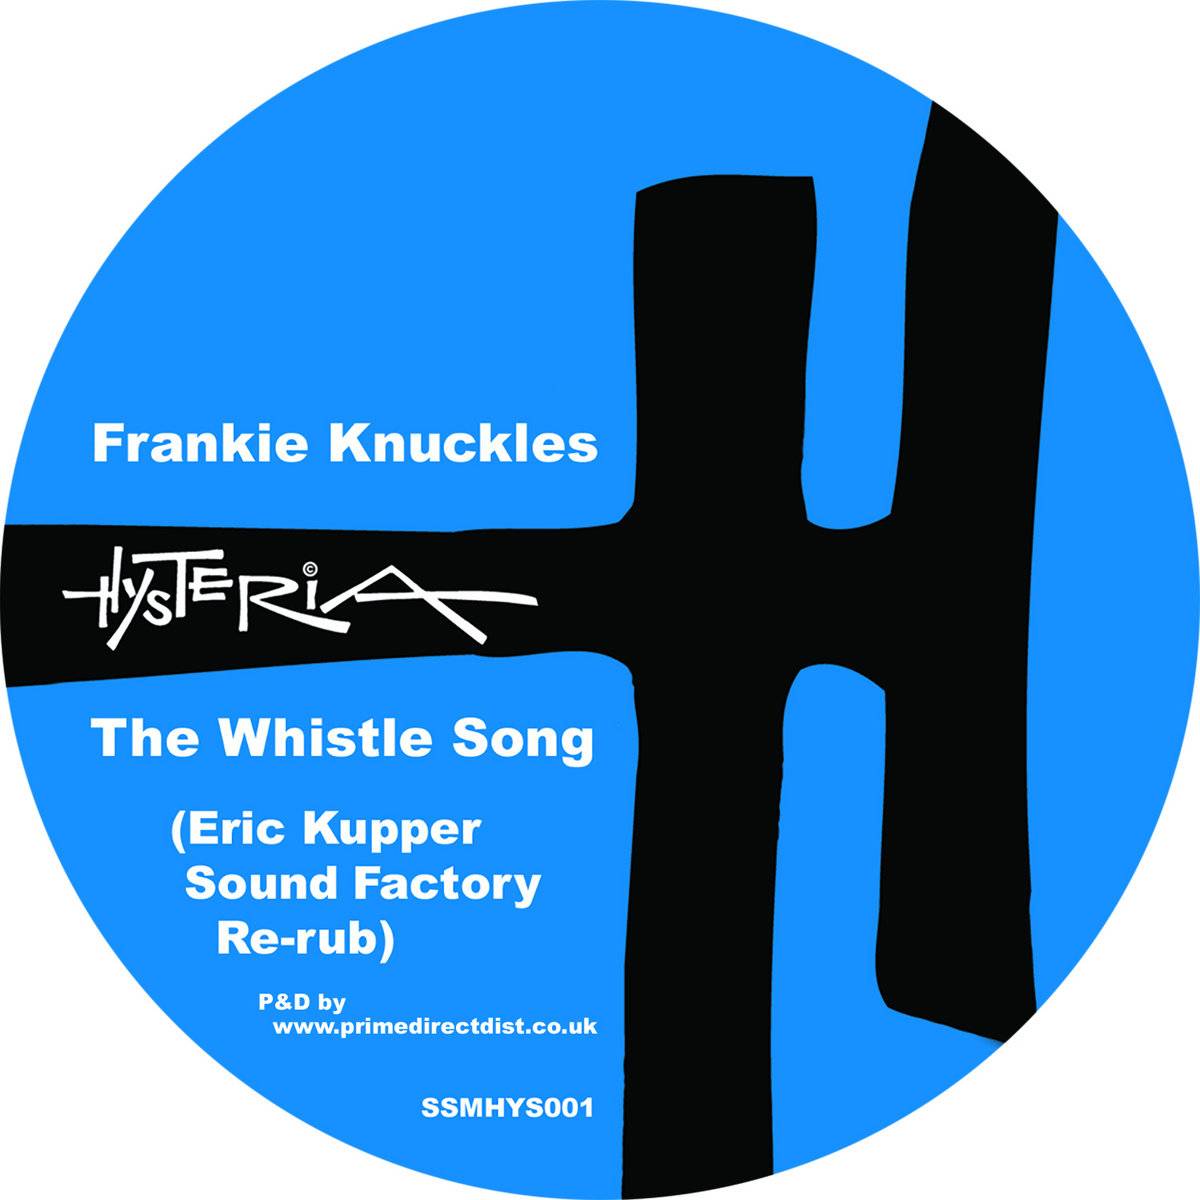 The Whistle Song - Eric Kupper Sound Factory Re Rub